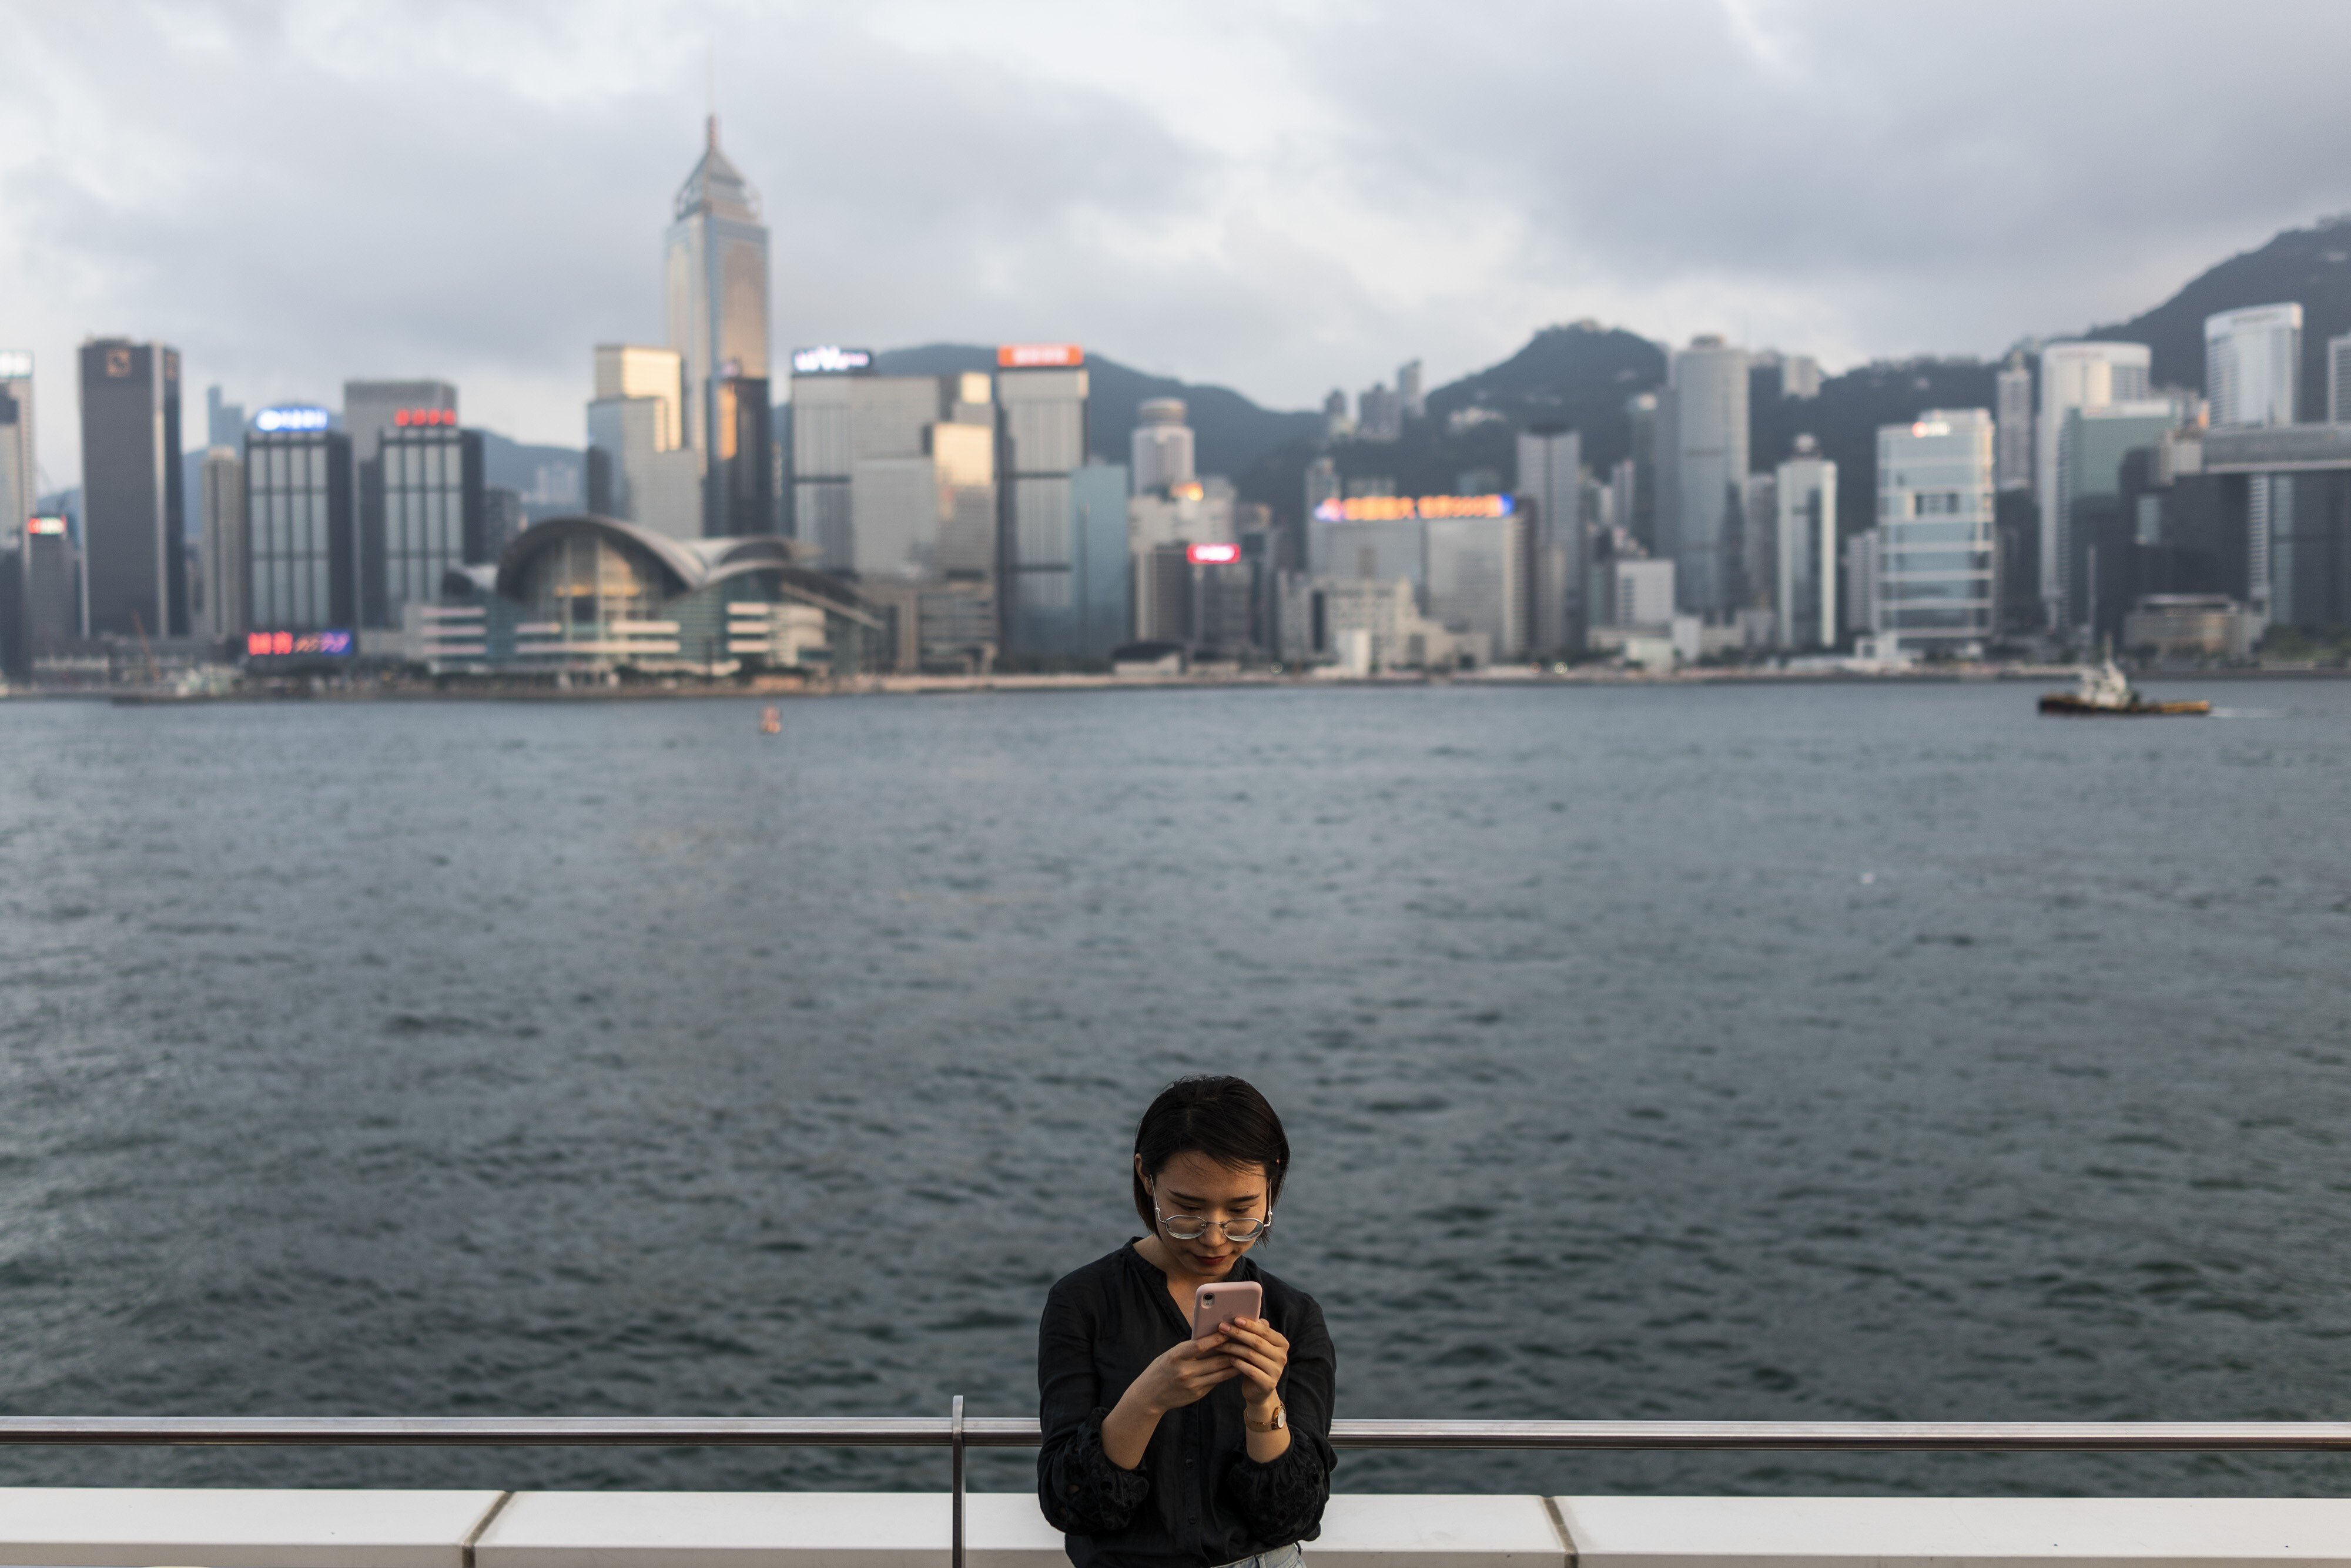 A woman uses a smartphone along Victoria Harbour in Tsim Sha Tsui, flanked by buildings in Hong Kong’s central business district, on April 29, 2019. With the clock ticking on Greater Bay Area integration, Hong Kong is under pressure to upgrade its data governance framework to fit in with China’s digital strategy. Photo: Bloomberg